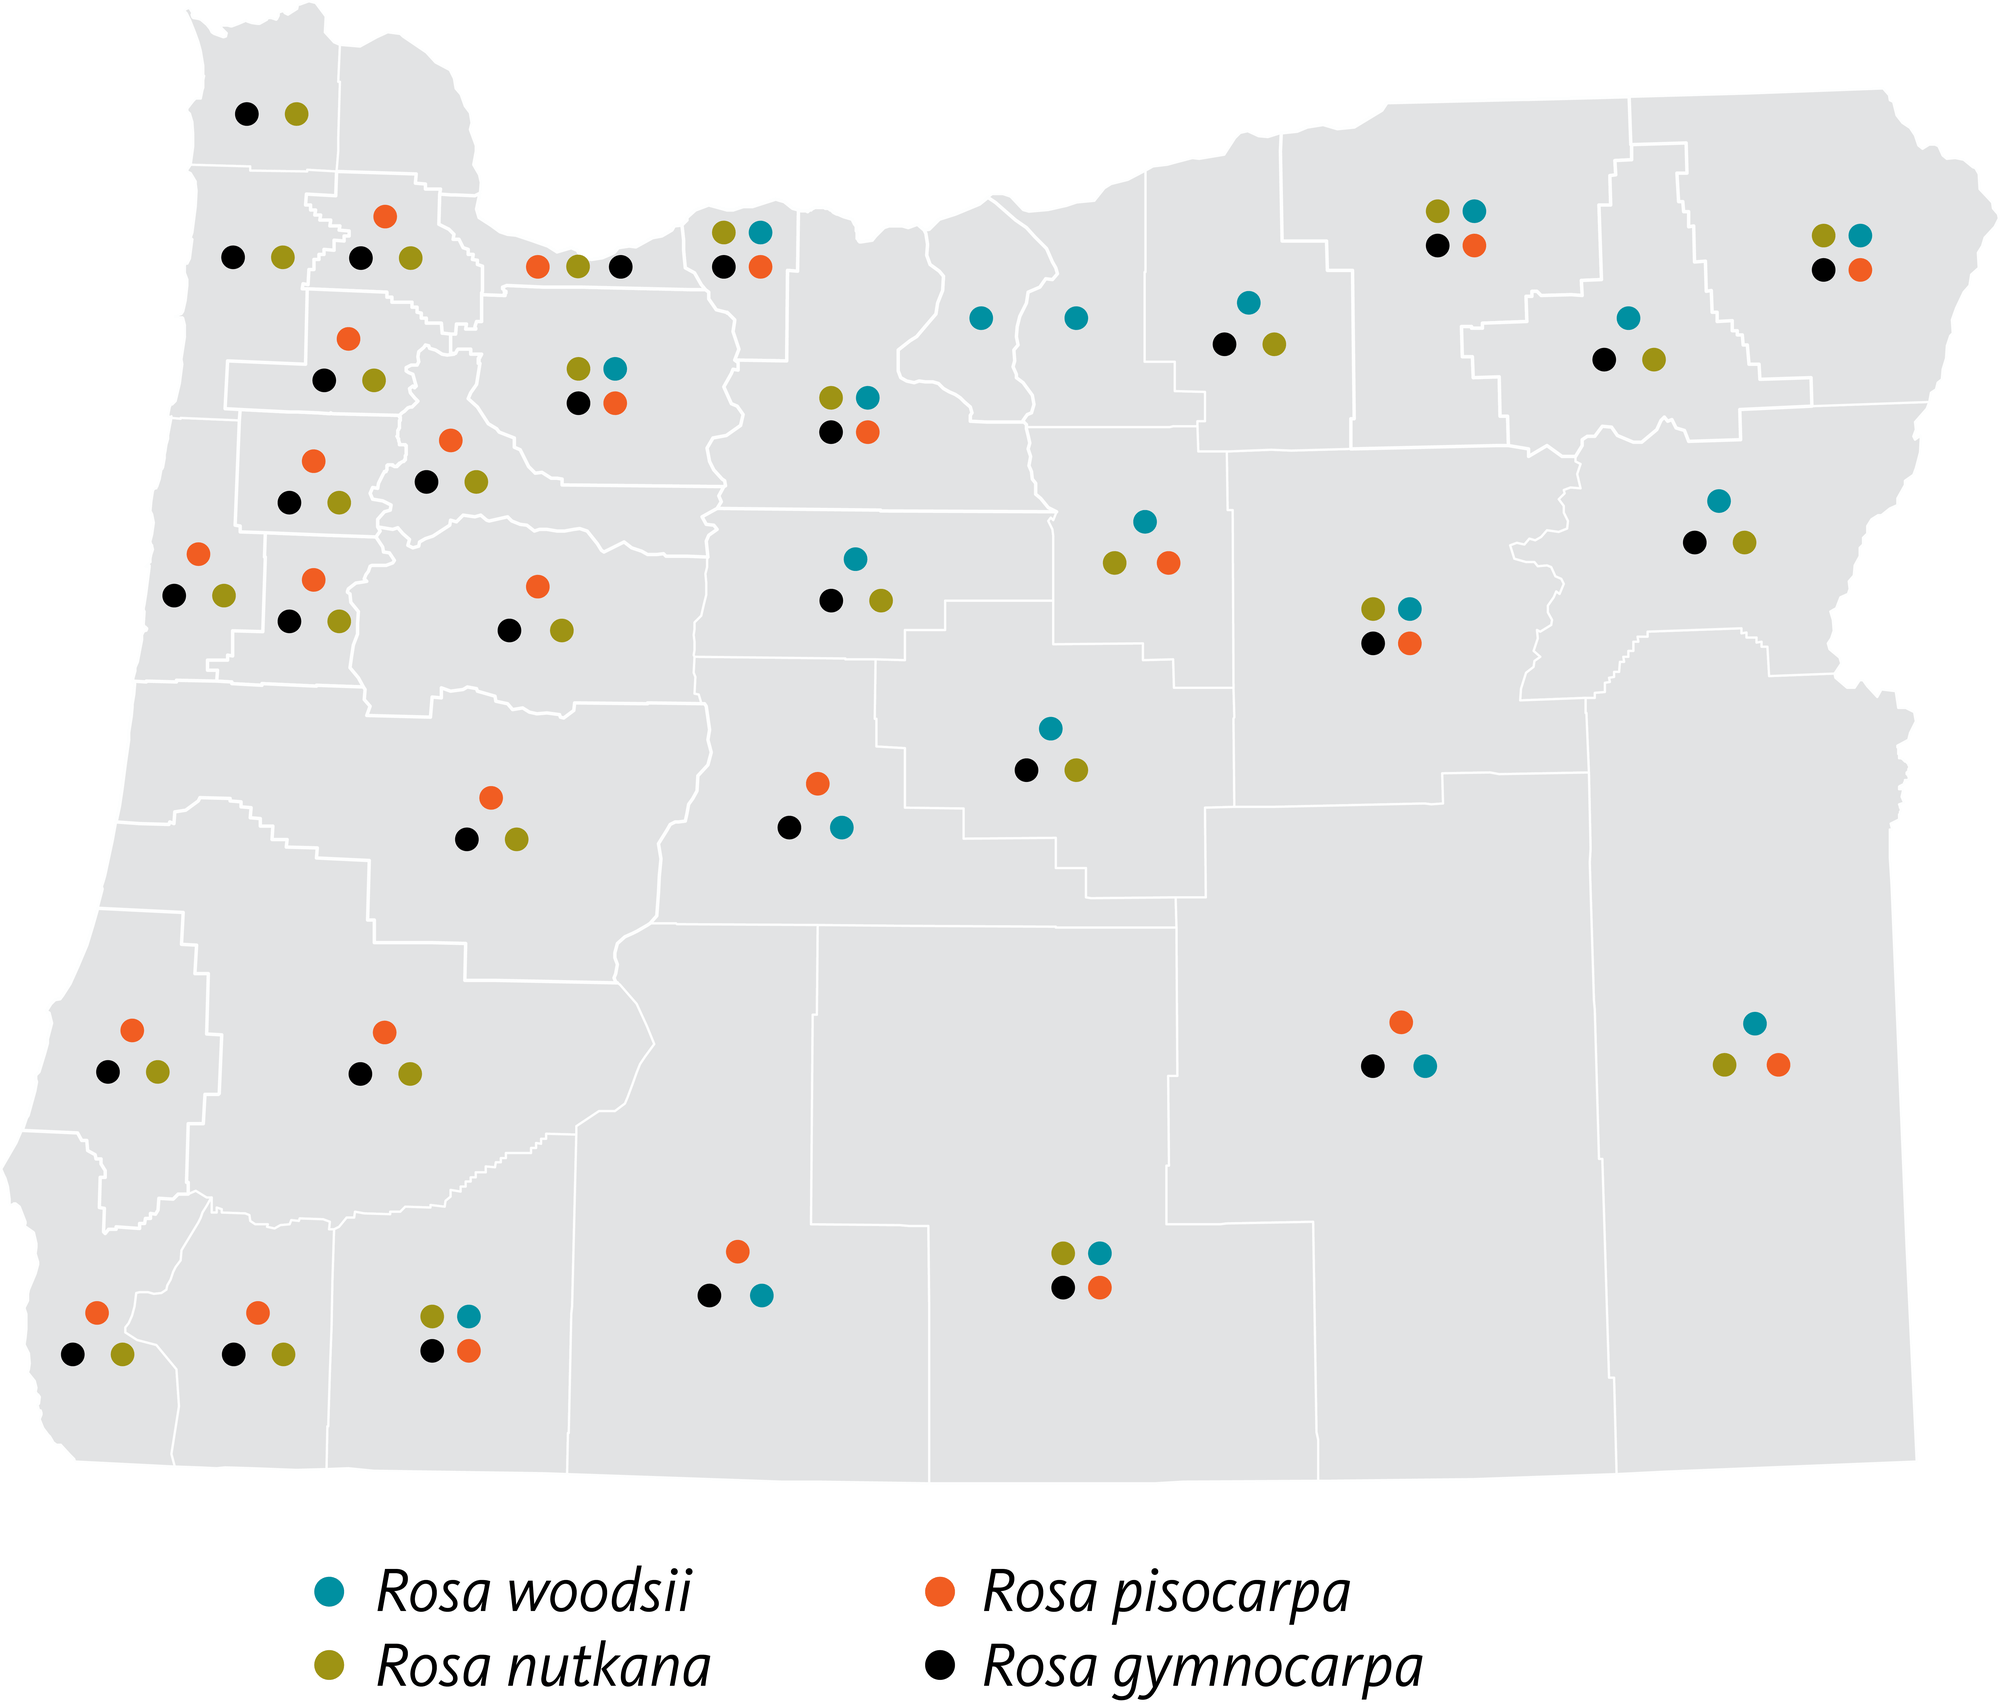 Oregon map showing which of four species of wild roses occurs where